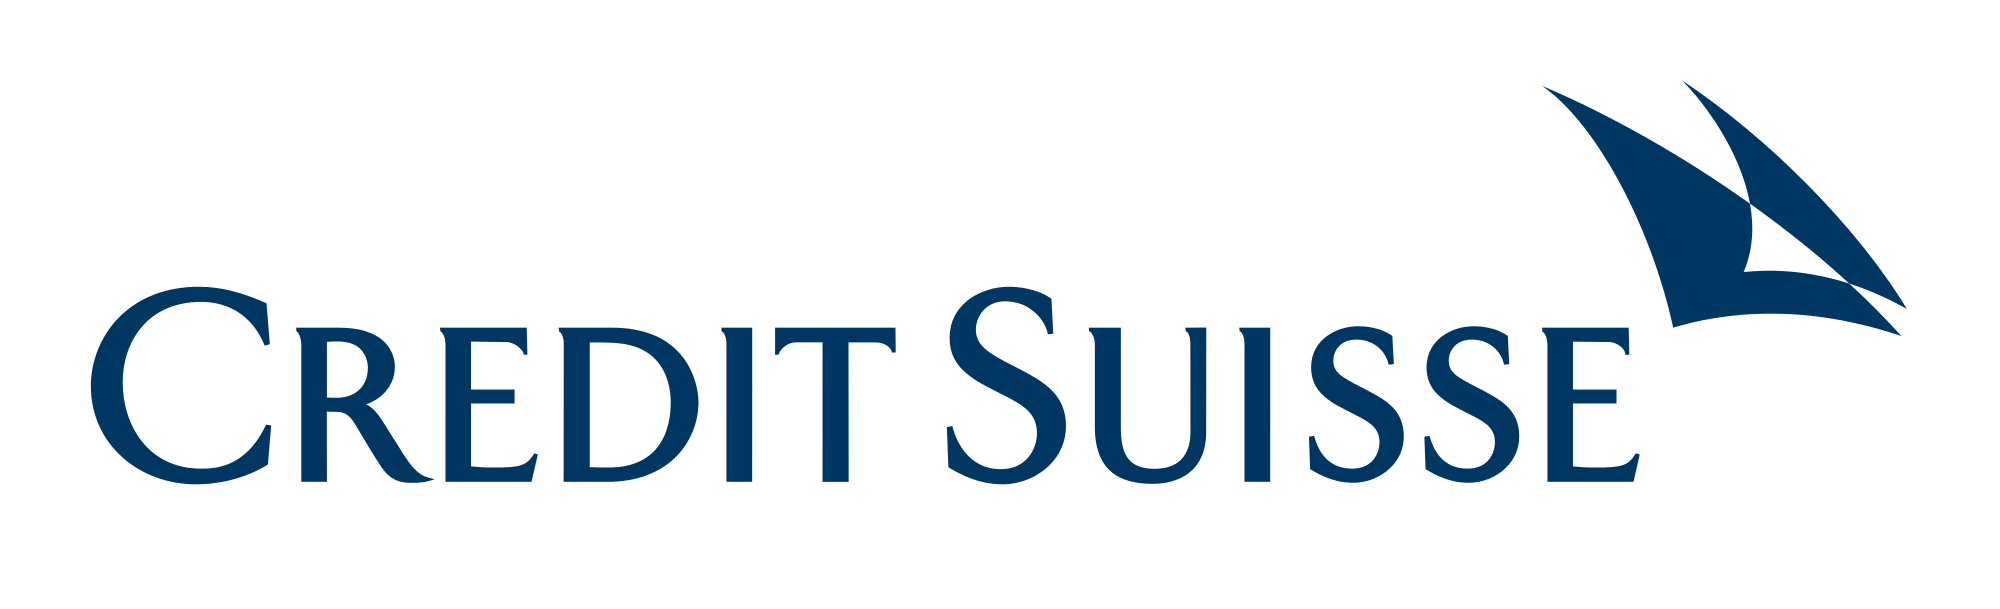 Collection of Credit Suisse Logo PNG. | PlusPNG